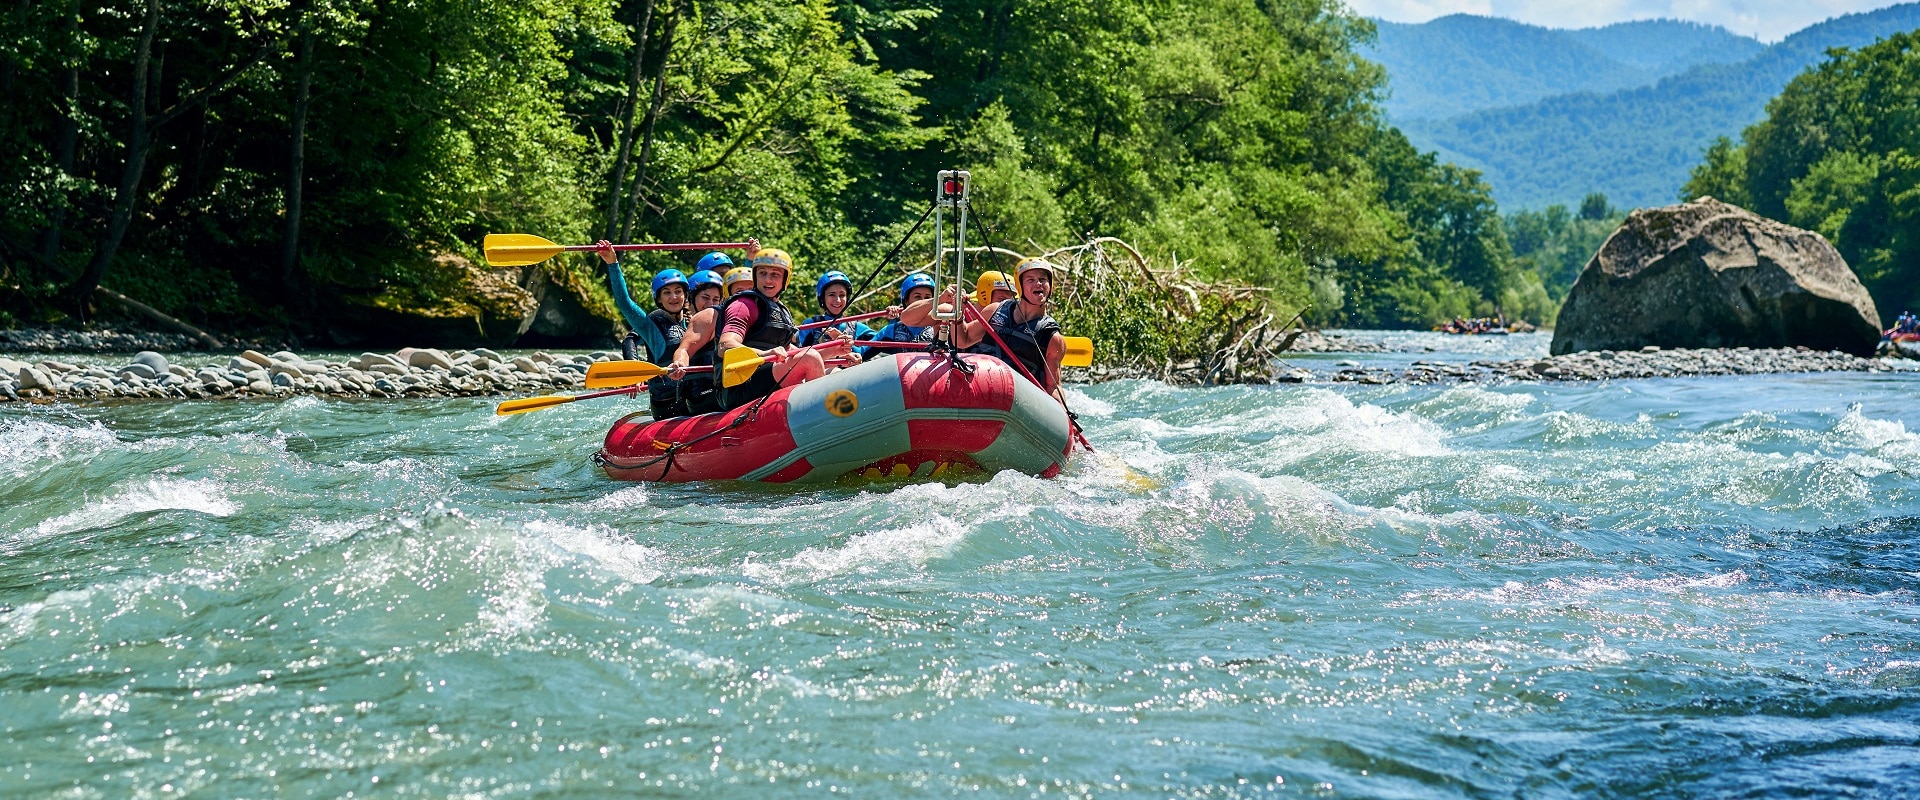 whitewater rafting tour costa rica